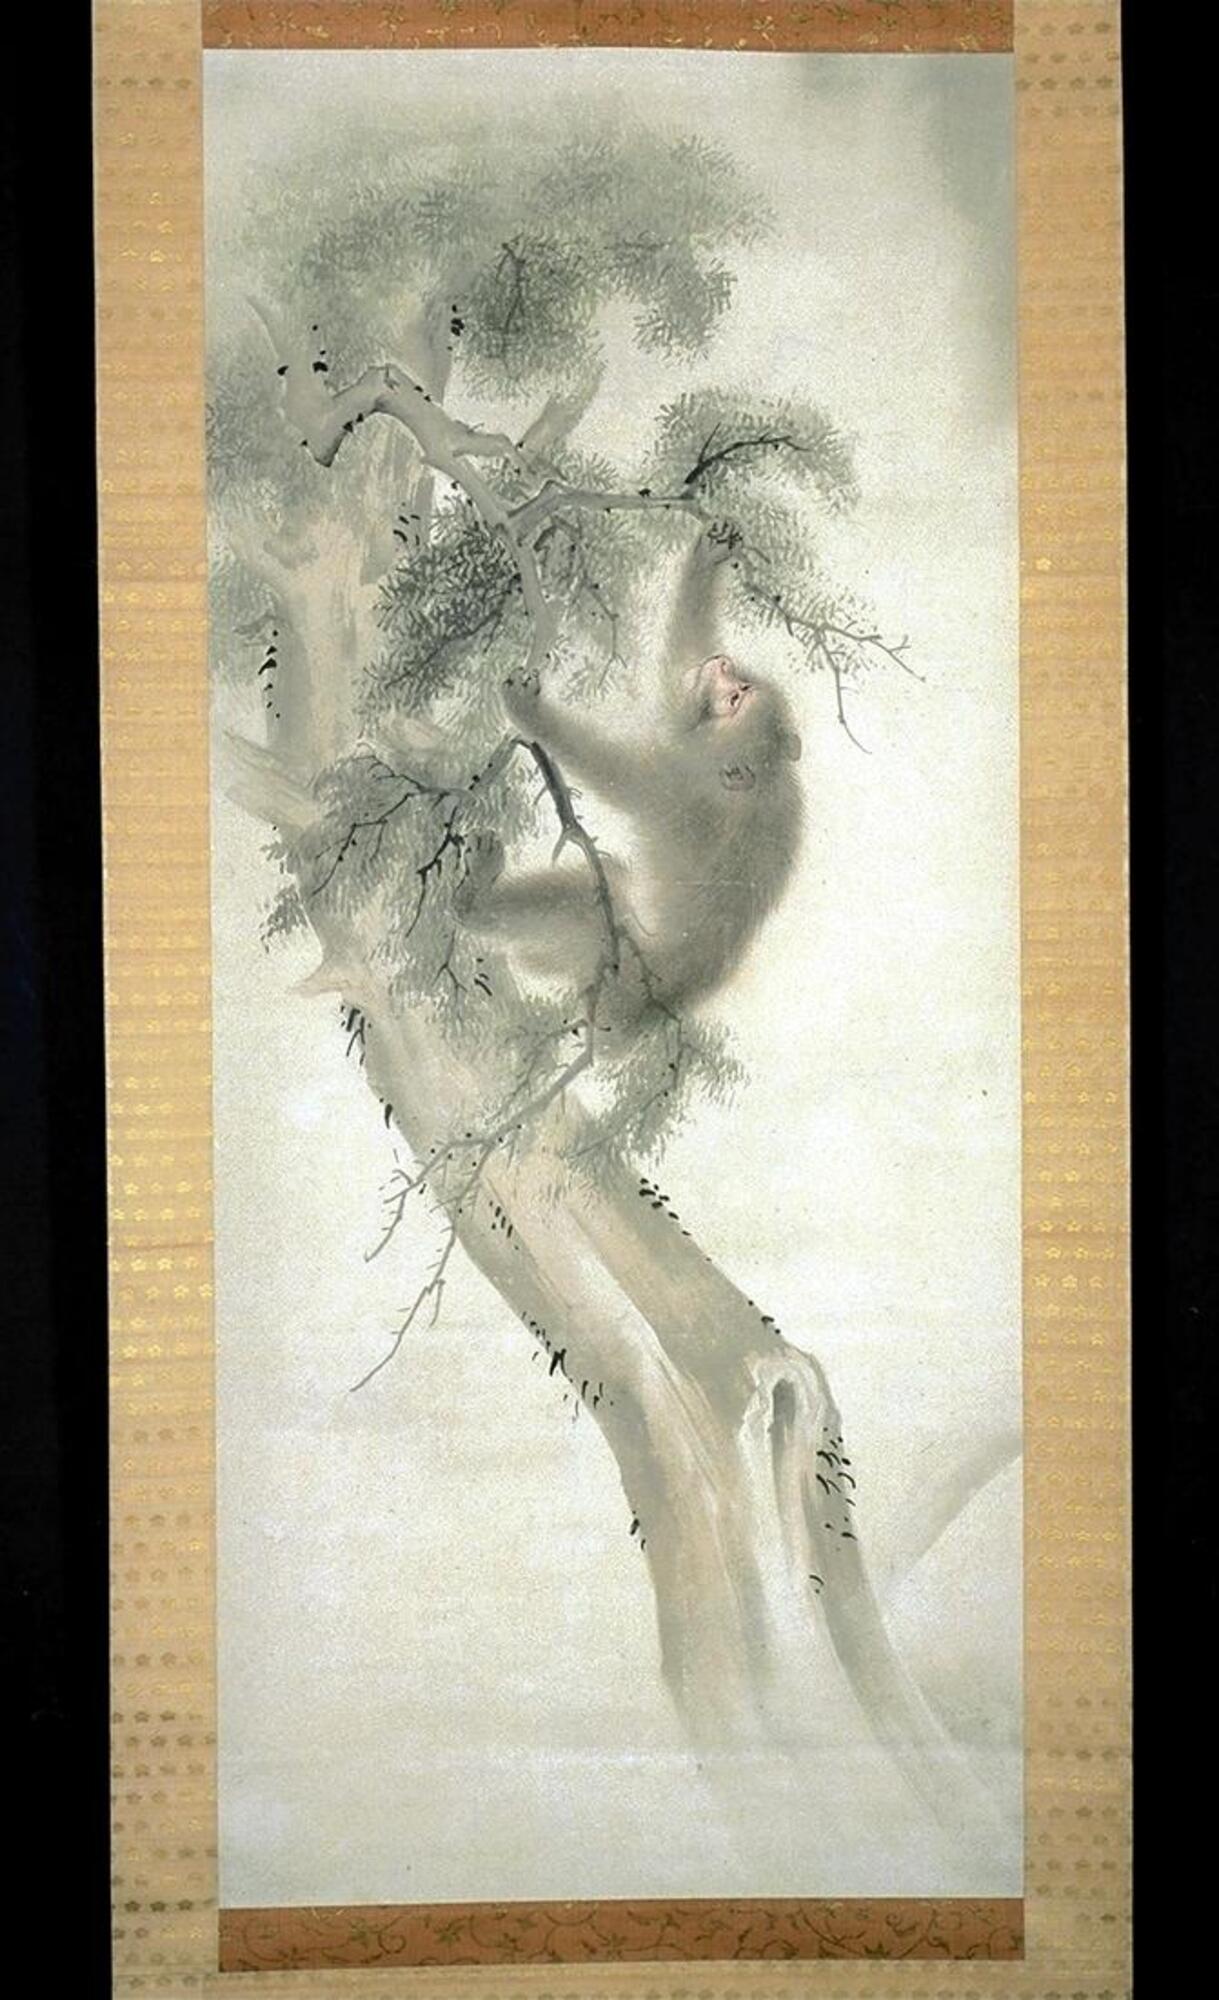 A monkey climbs up a tree, grasping at the branches with his hands and feet. The image uses soft colors, and the monkey almost appears to be leaning or falling away from the tree. The top right corner appears gray. This is a pair with 1986/2.61.1.